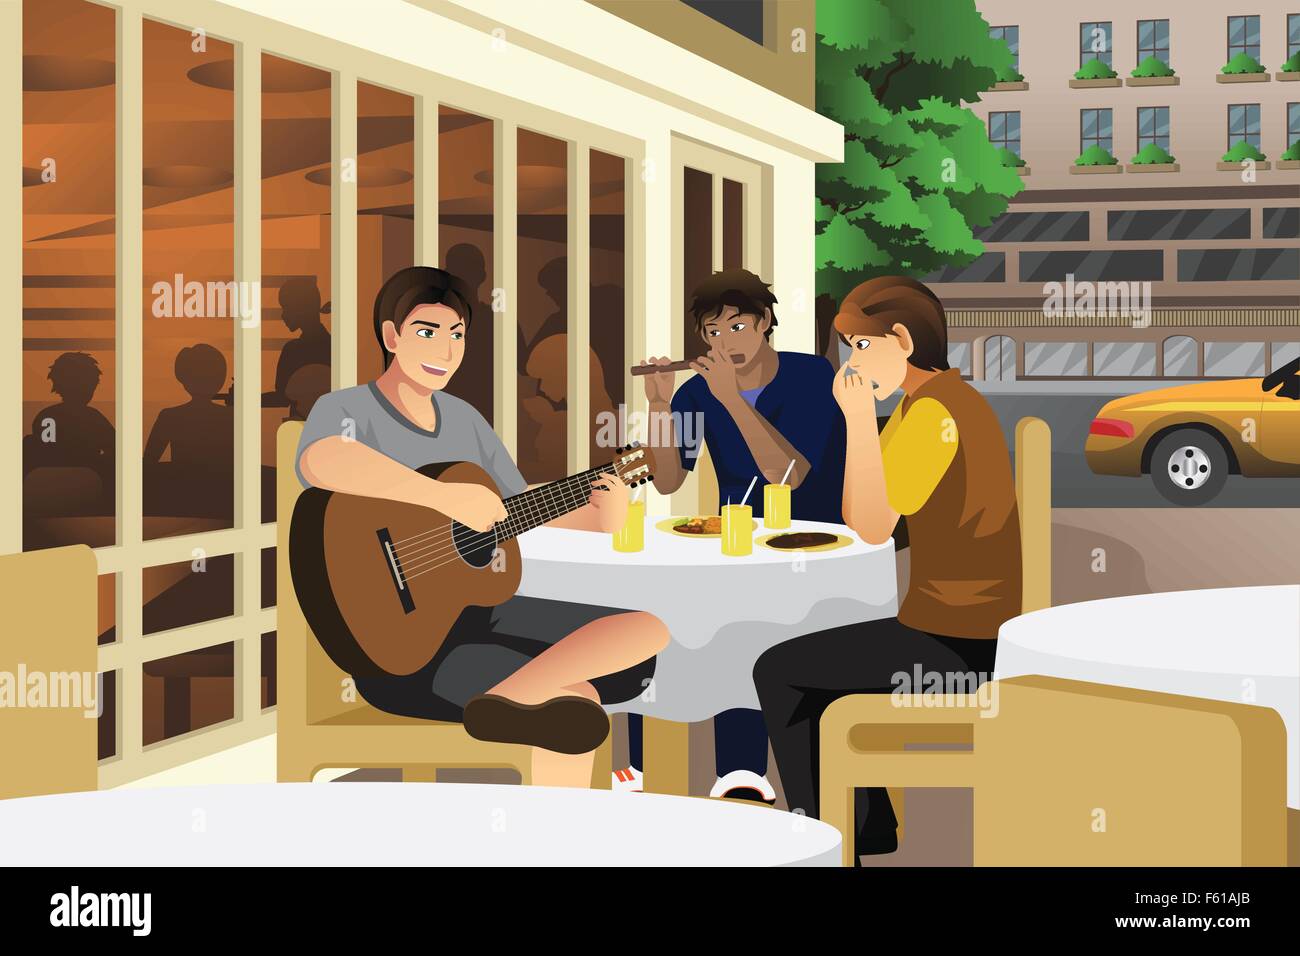 A vector illustration of young men playing music in cafe together Stock Vector